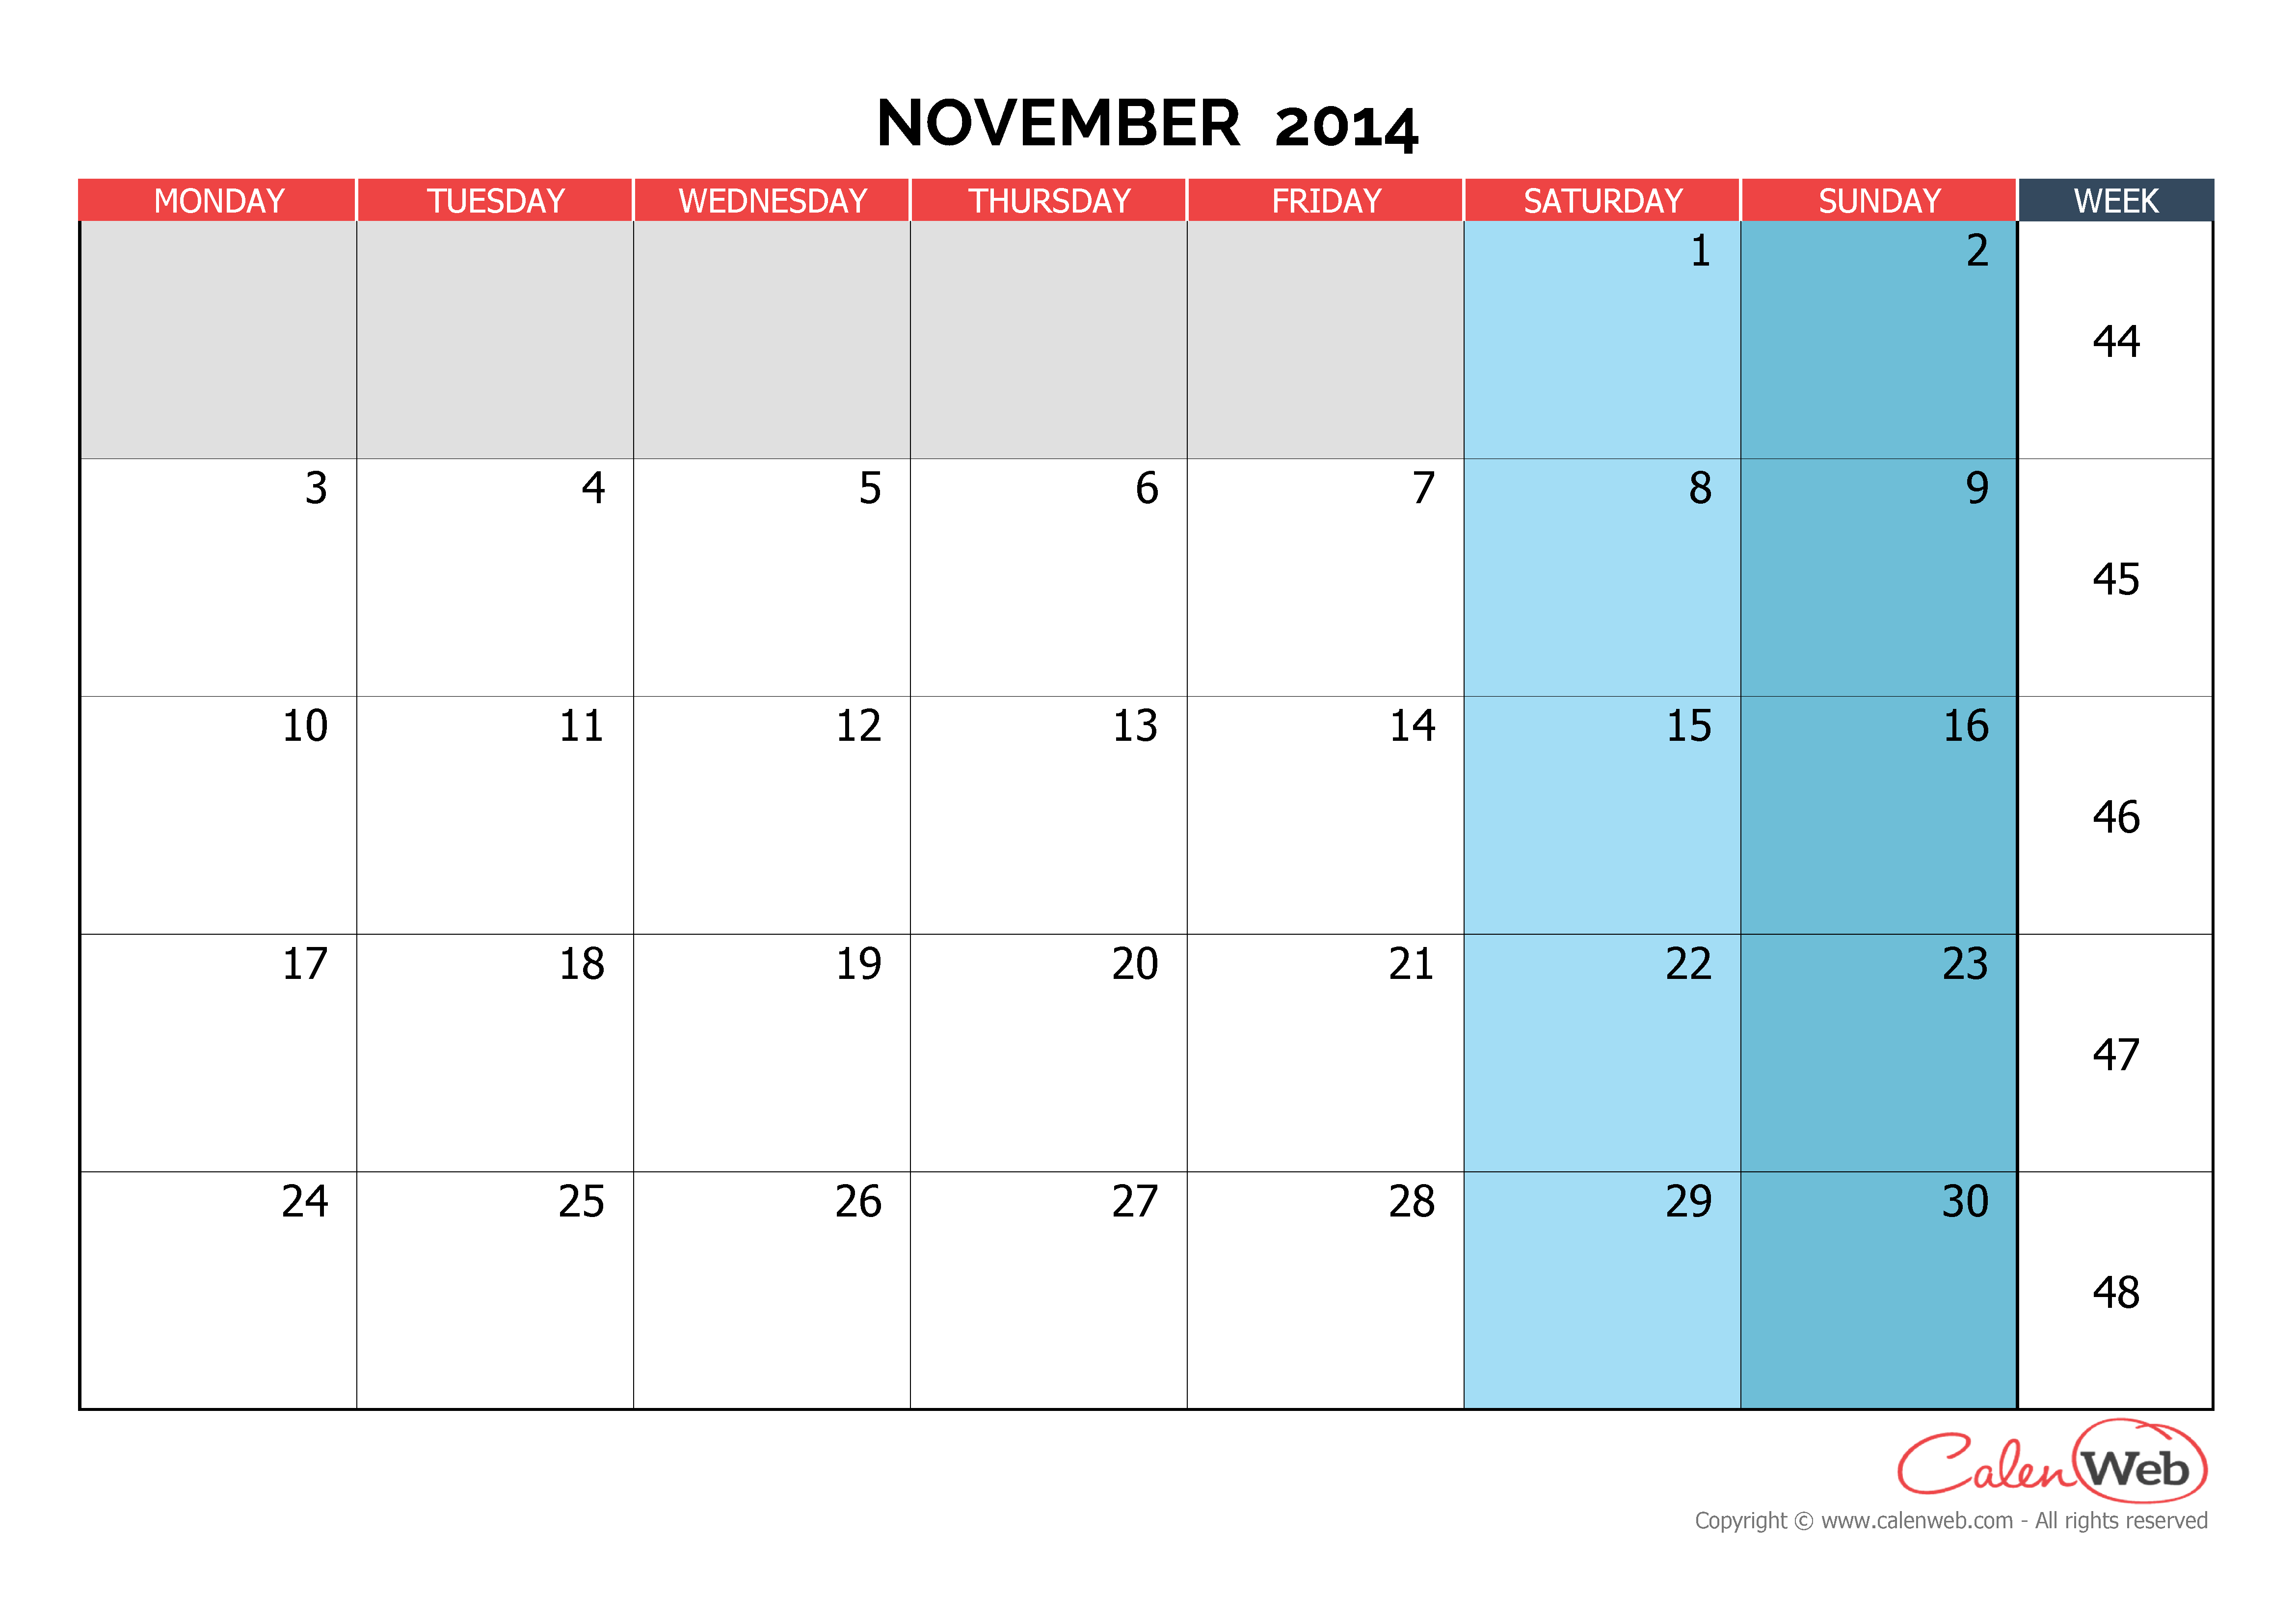 Monthly Calendar - Month Of November 2014 The Week Starts On